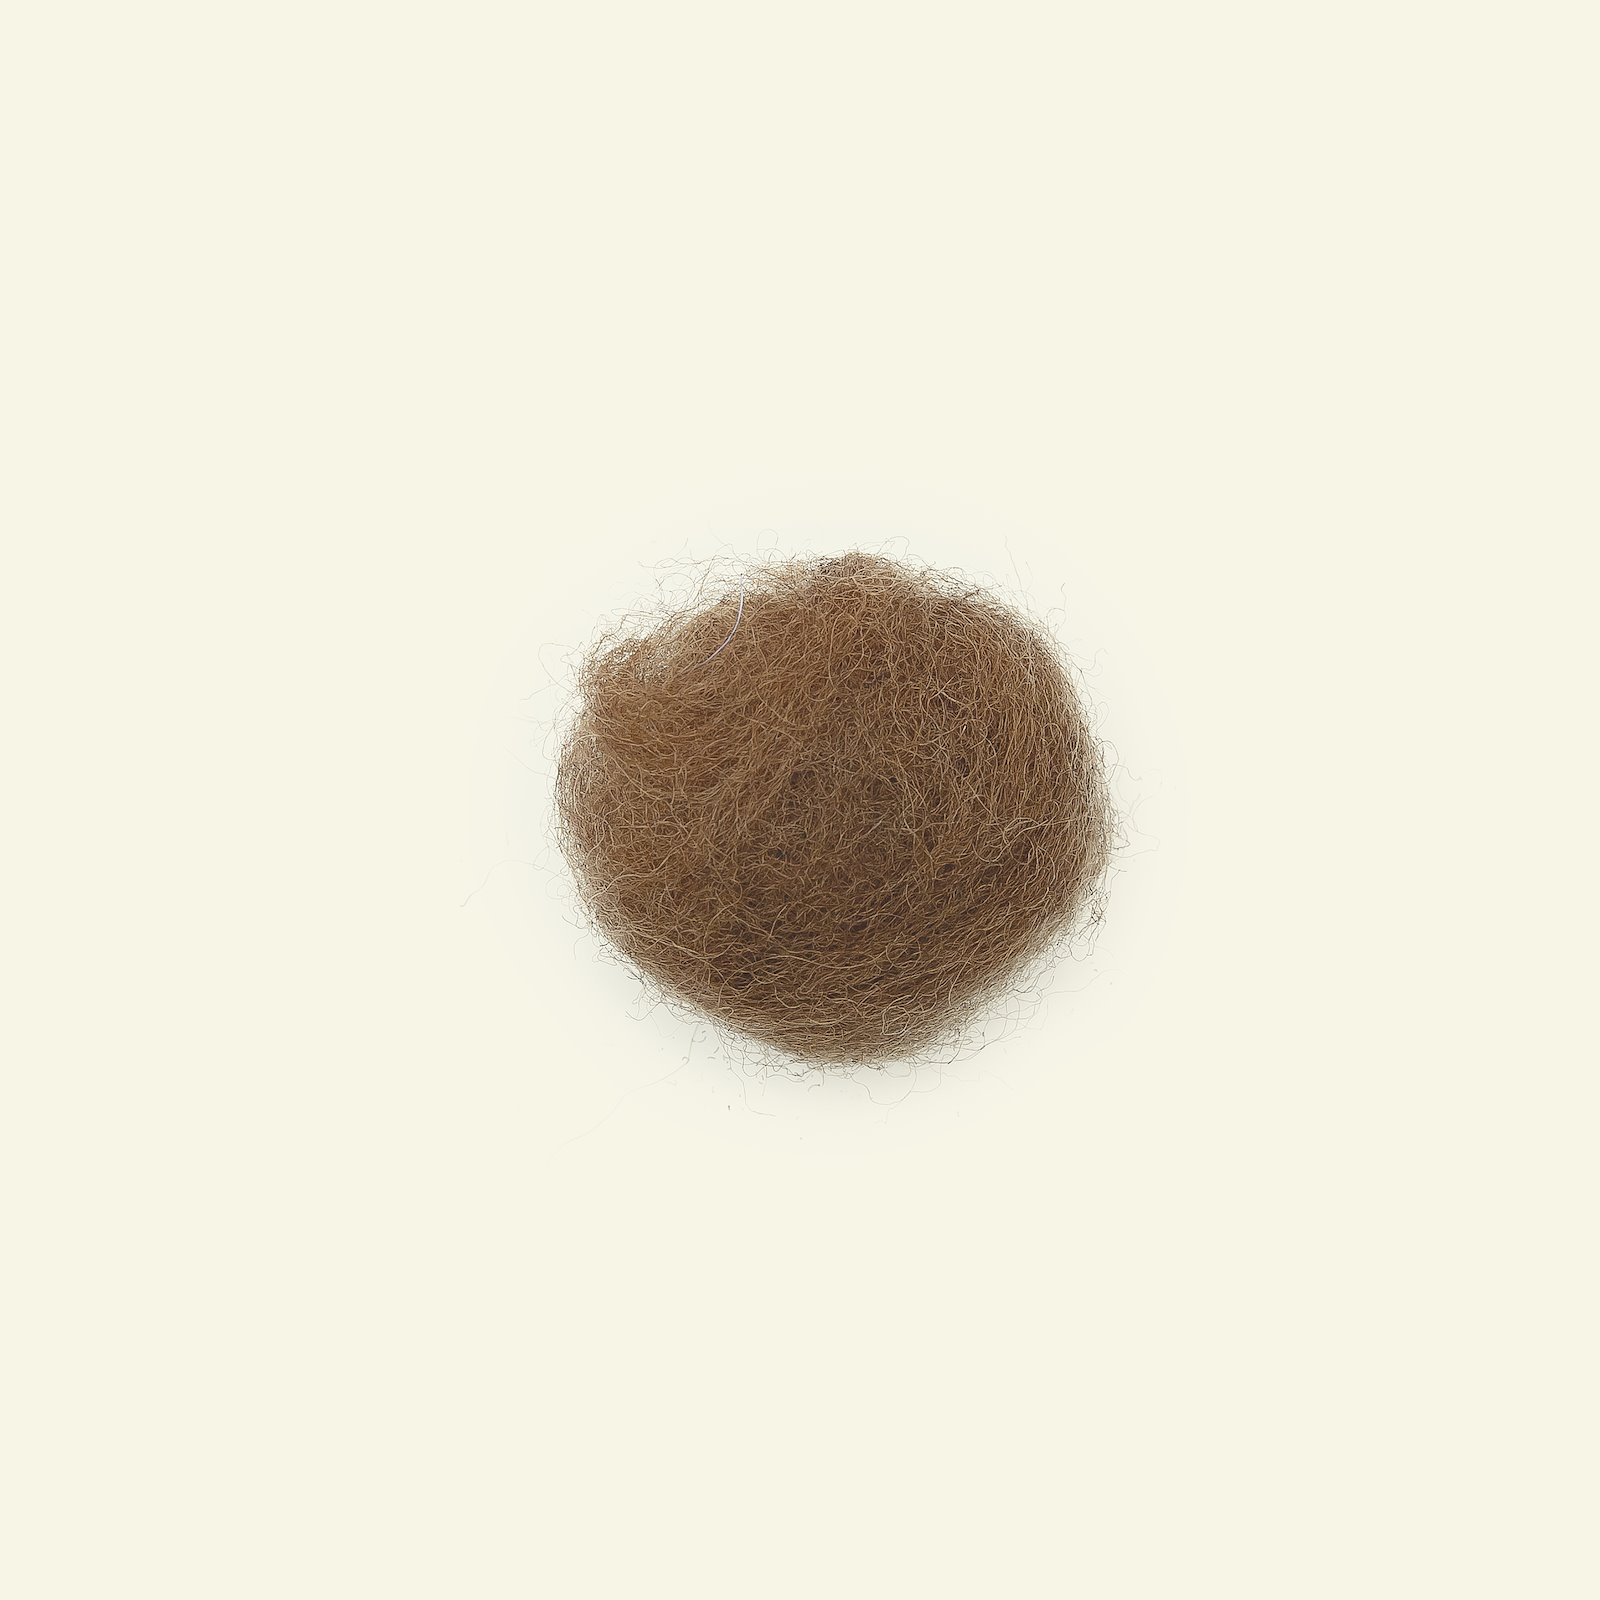 Carded wool brown 50g 90048004_pack_b